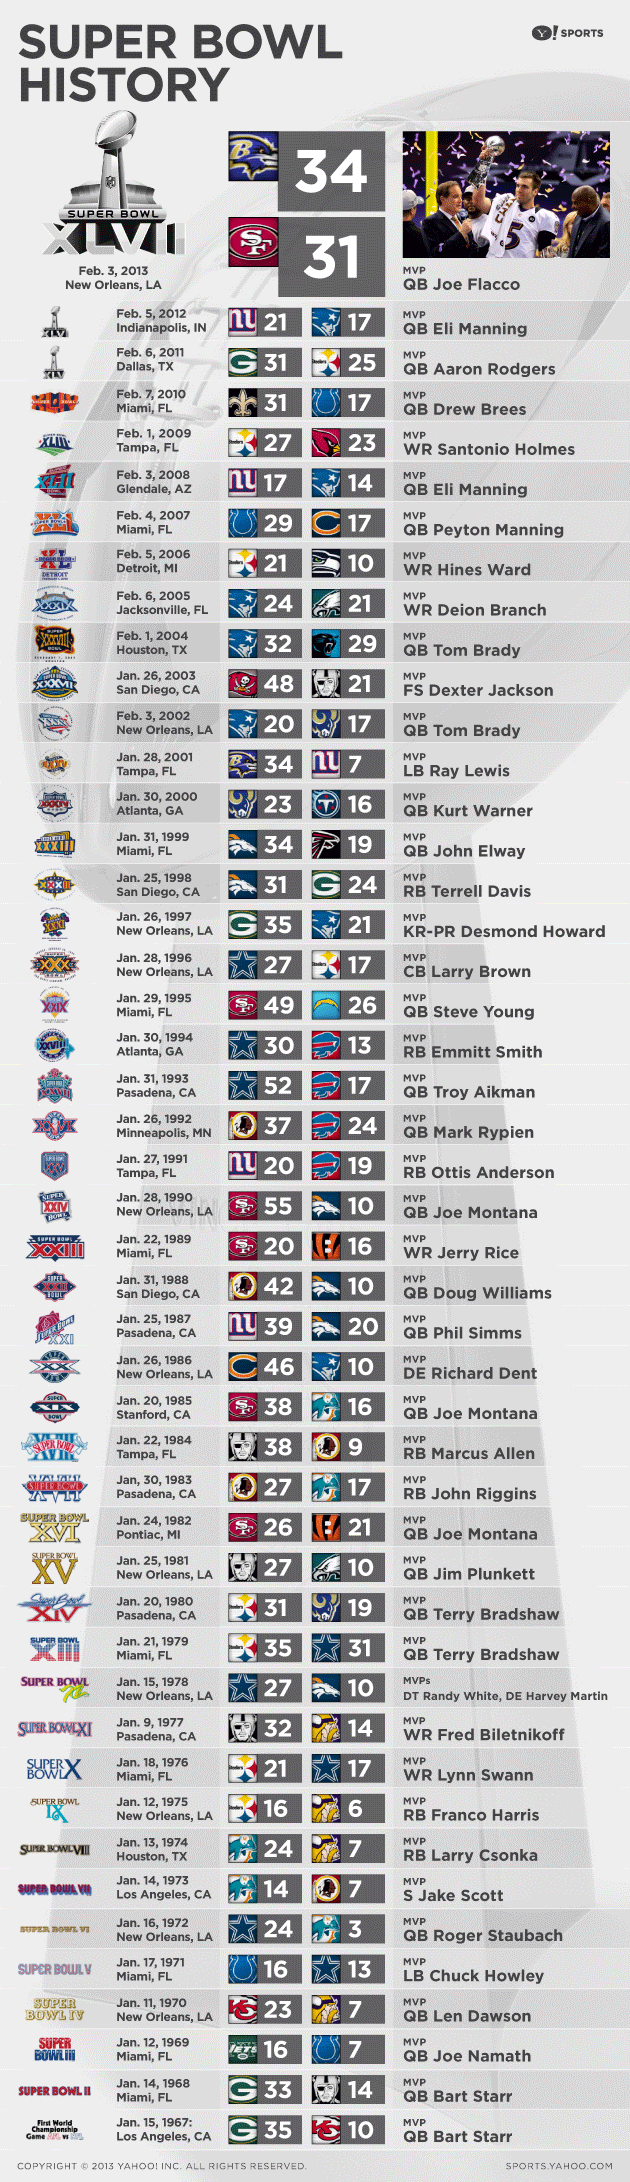 Super Bowl Winners of the Past 10 Years